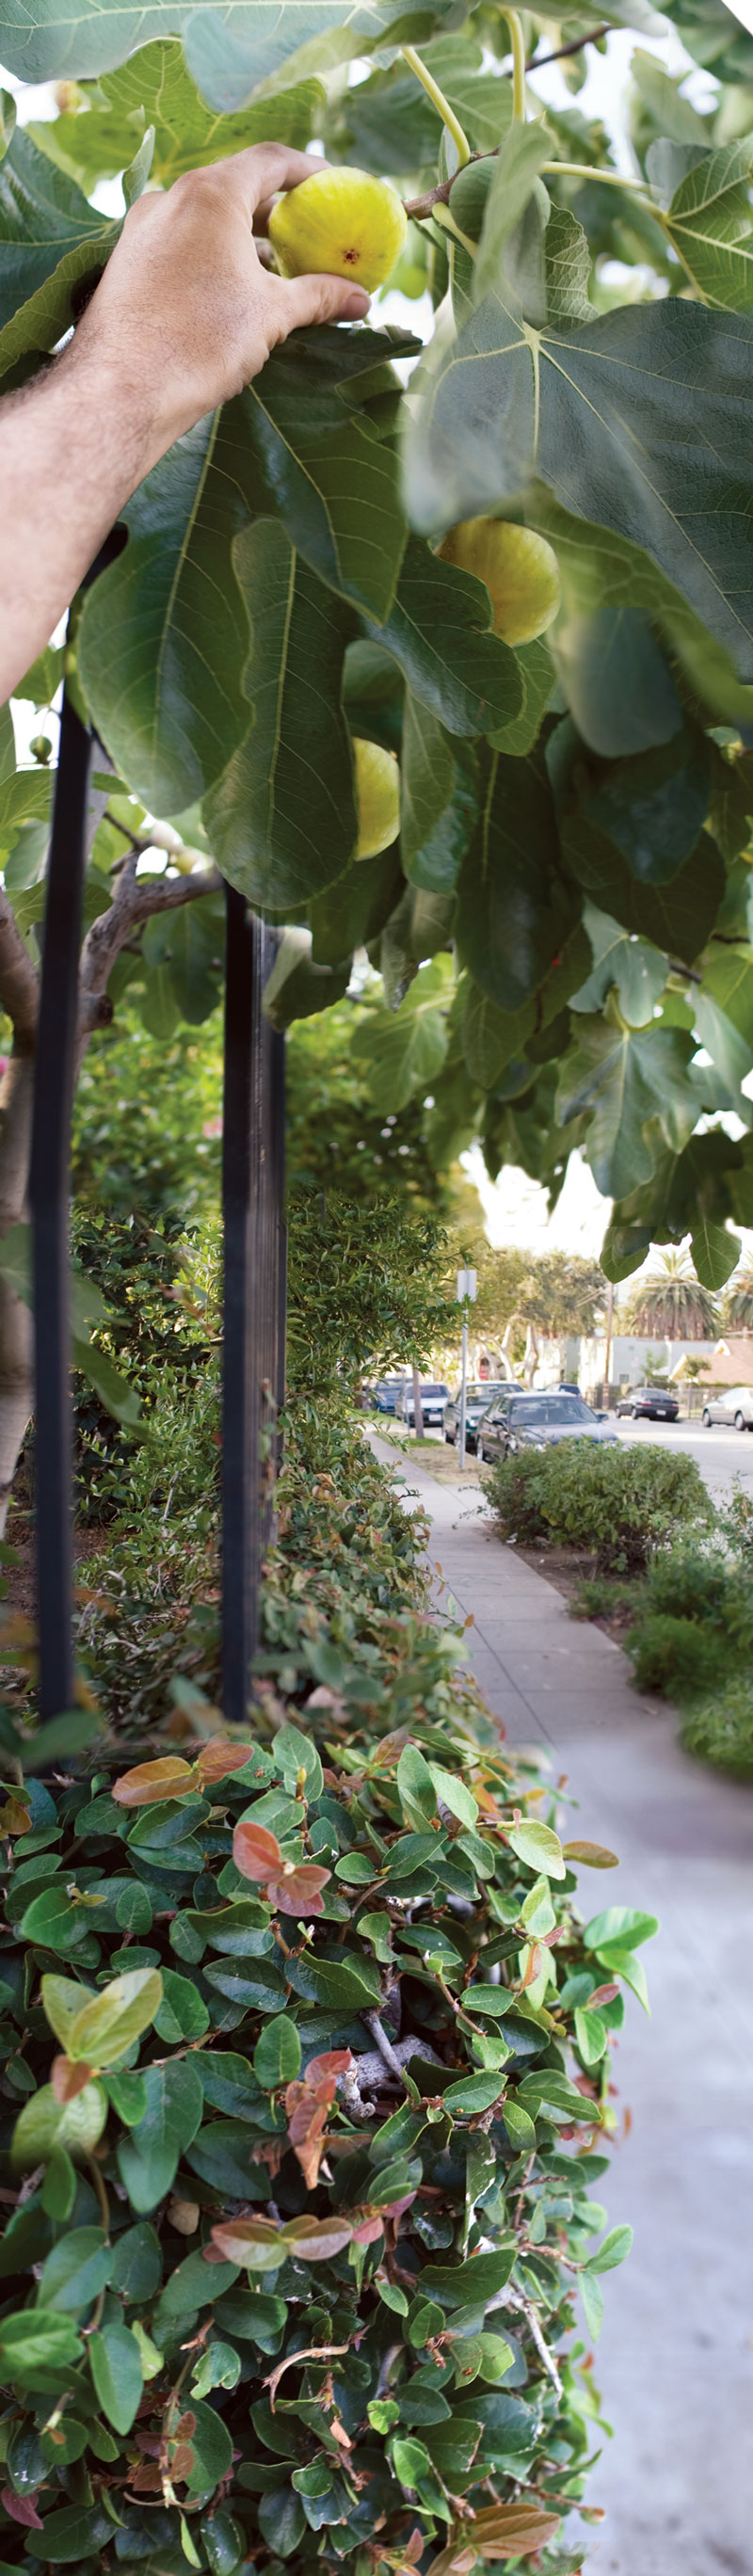 A photograph of figs on the border of private property, Talmadge Street, Los Angeles. An example of half-public, half-private fruit.